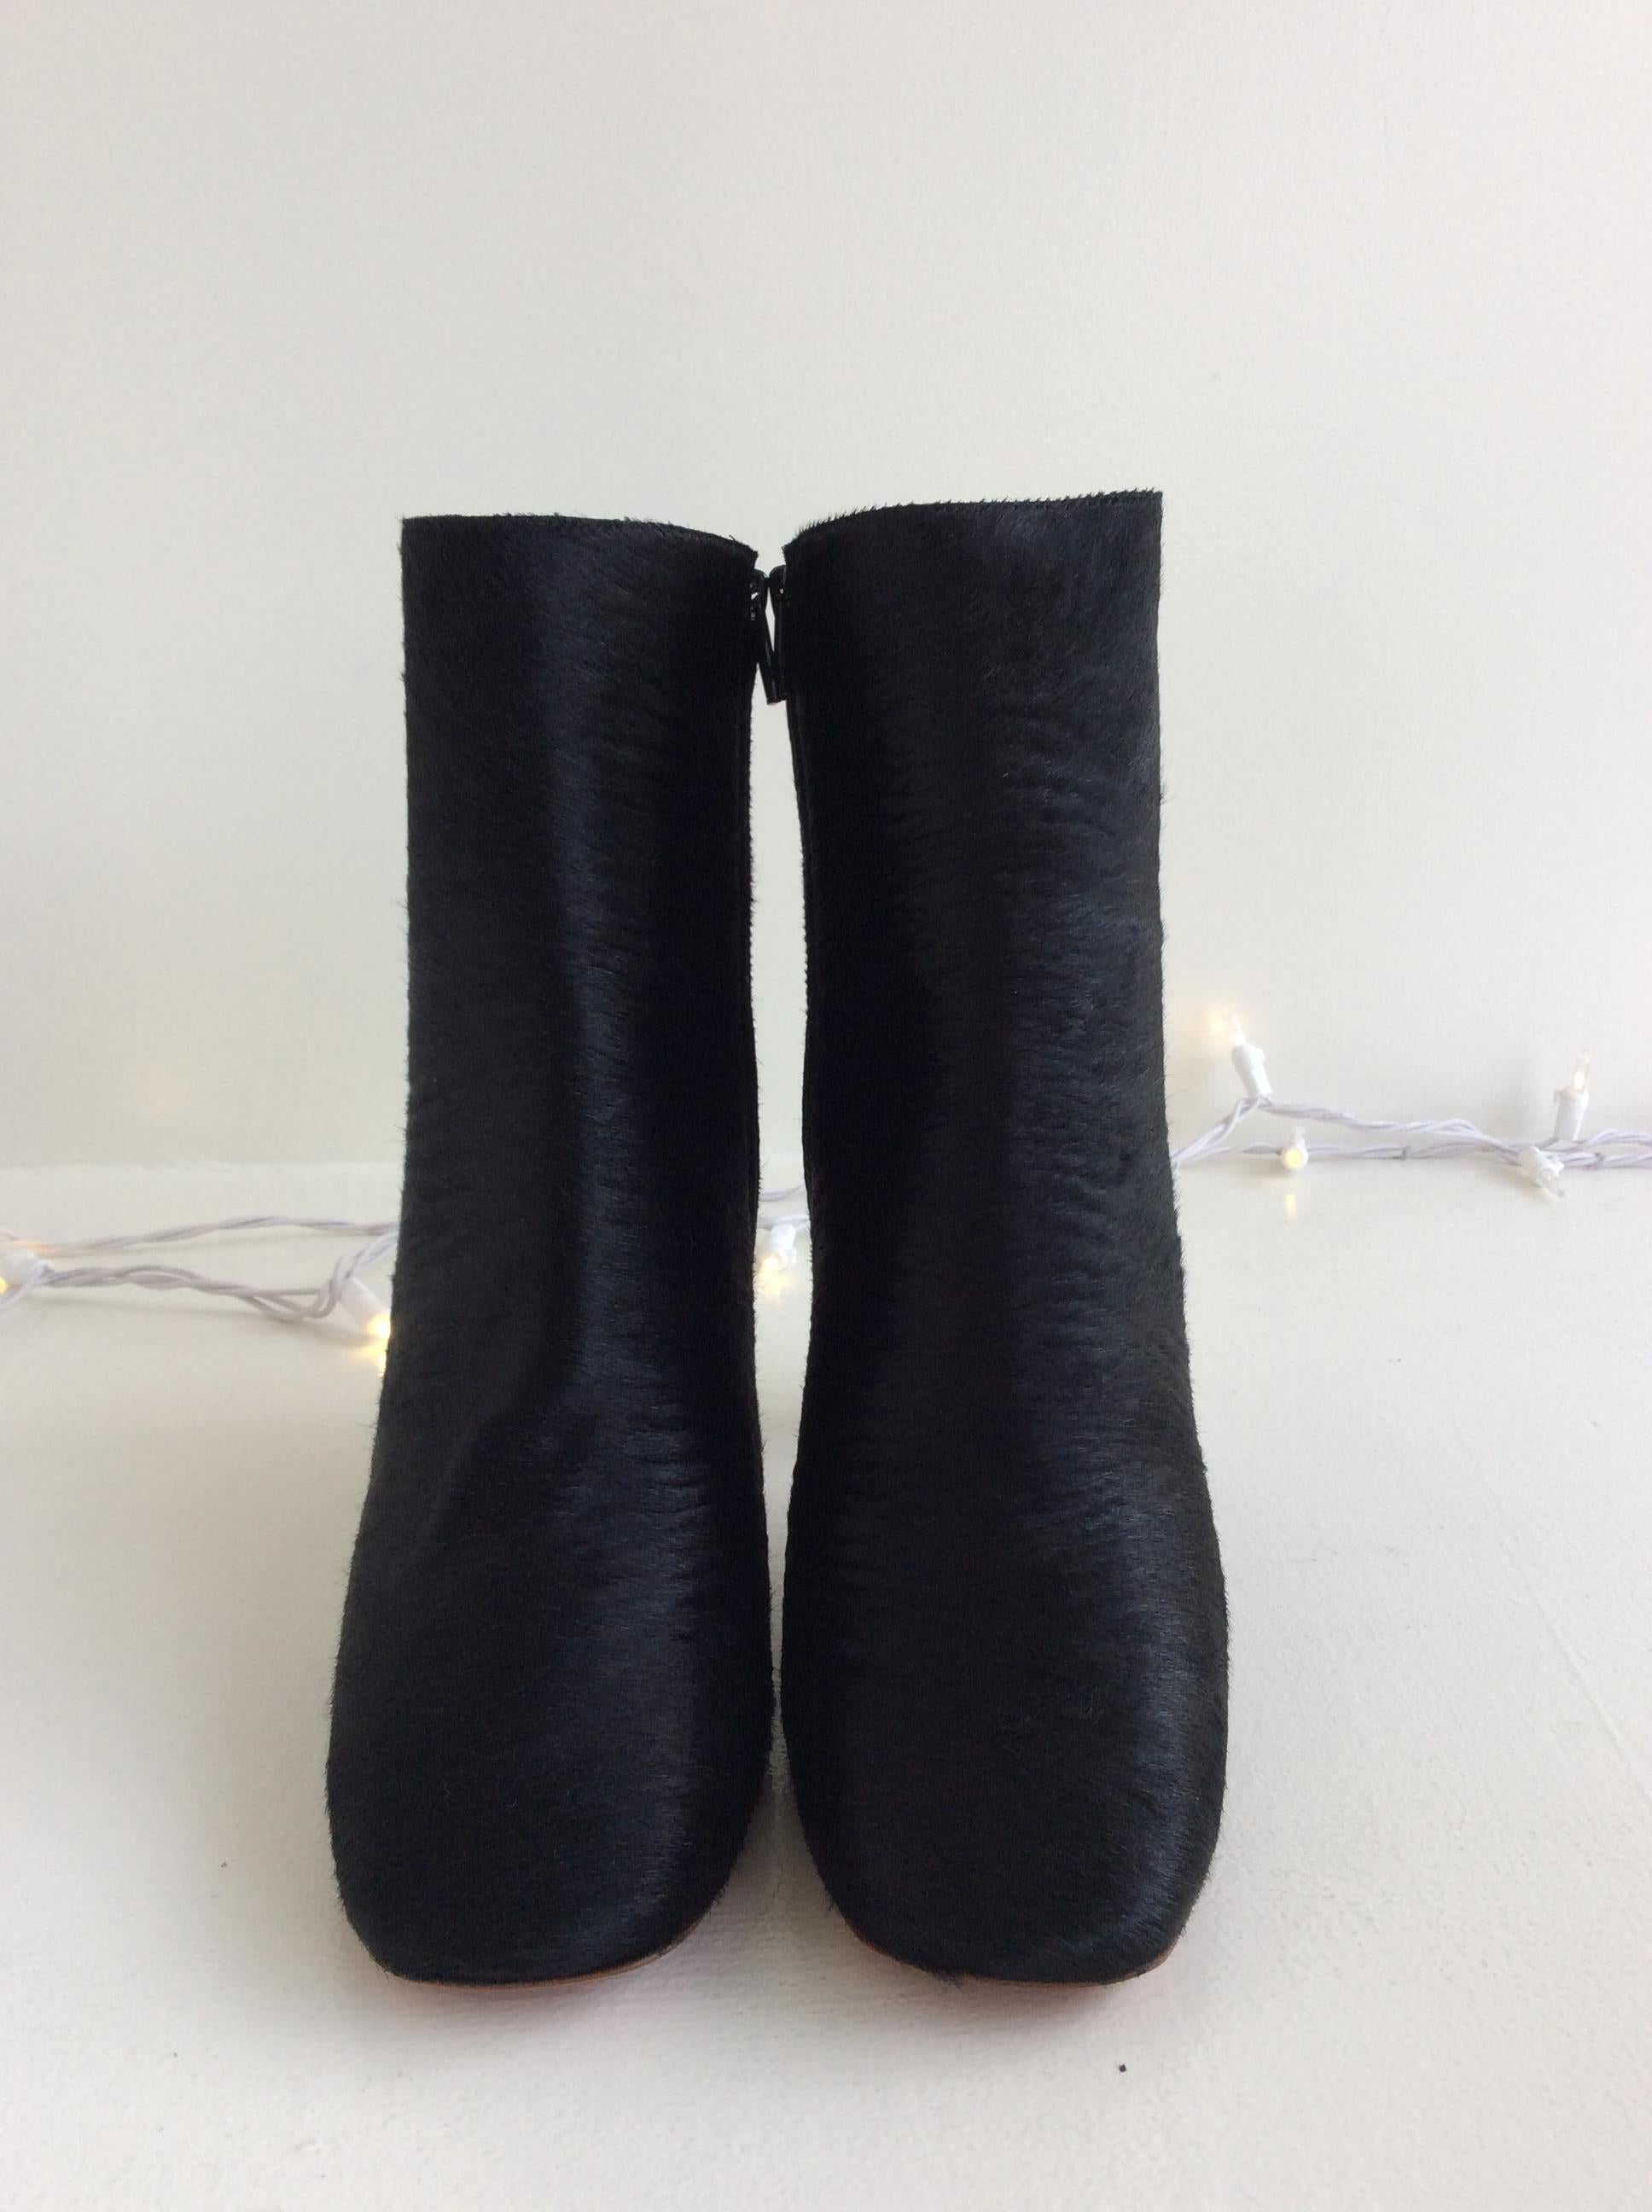 black boot with silver heel